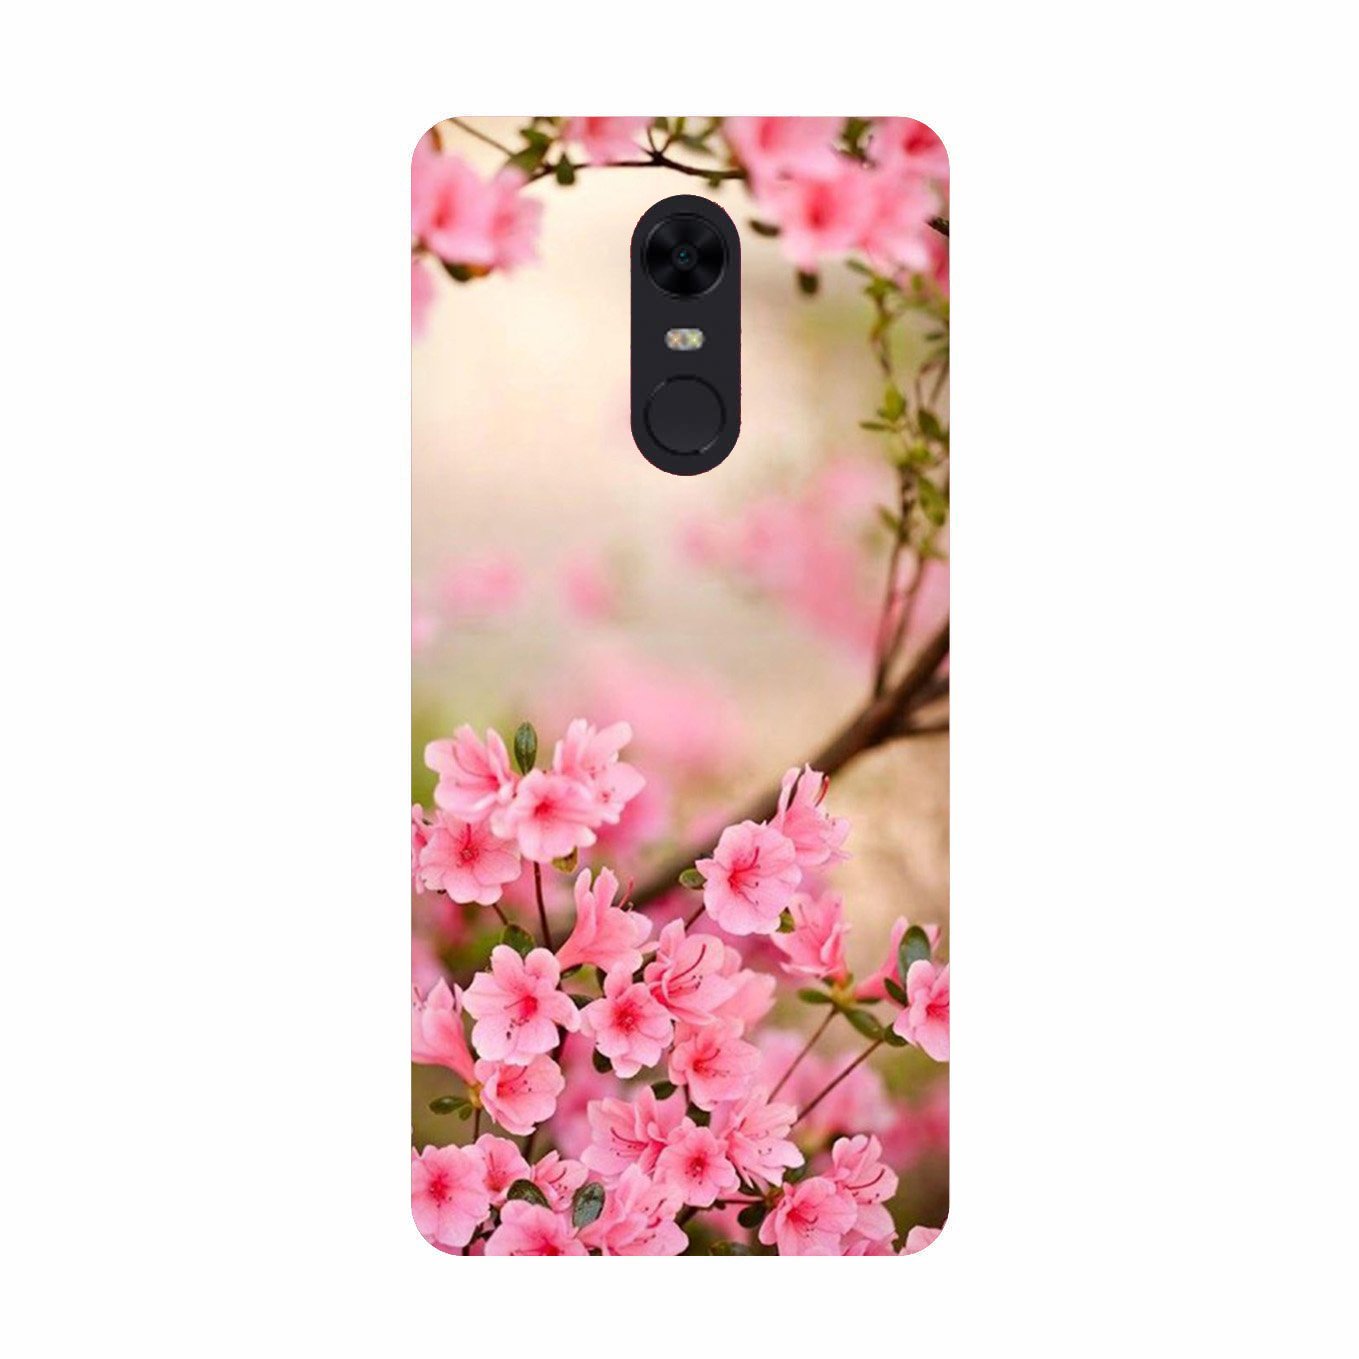 Pink flowers Case for Redmi Note 5